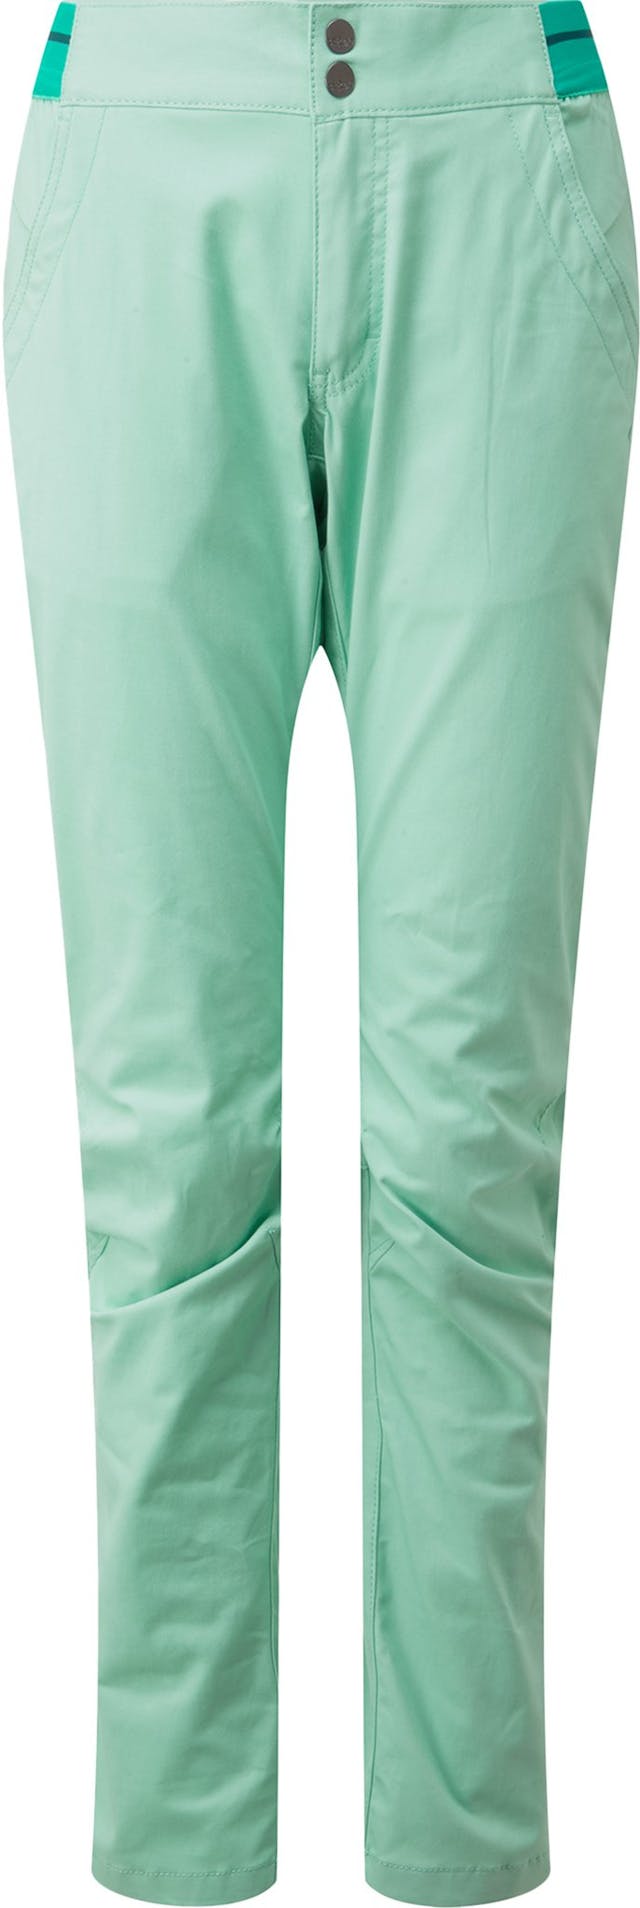 Product image for Zawn Pants - Women's